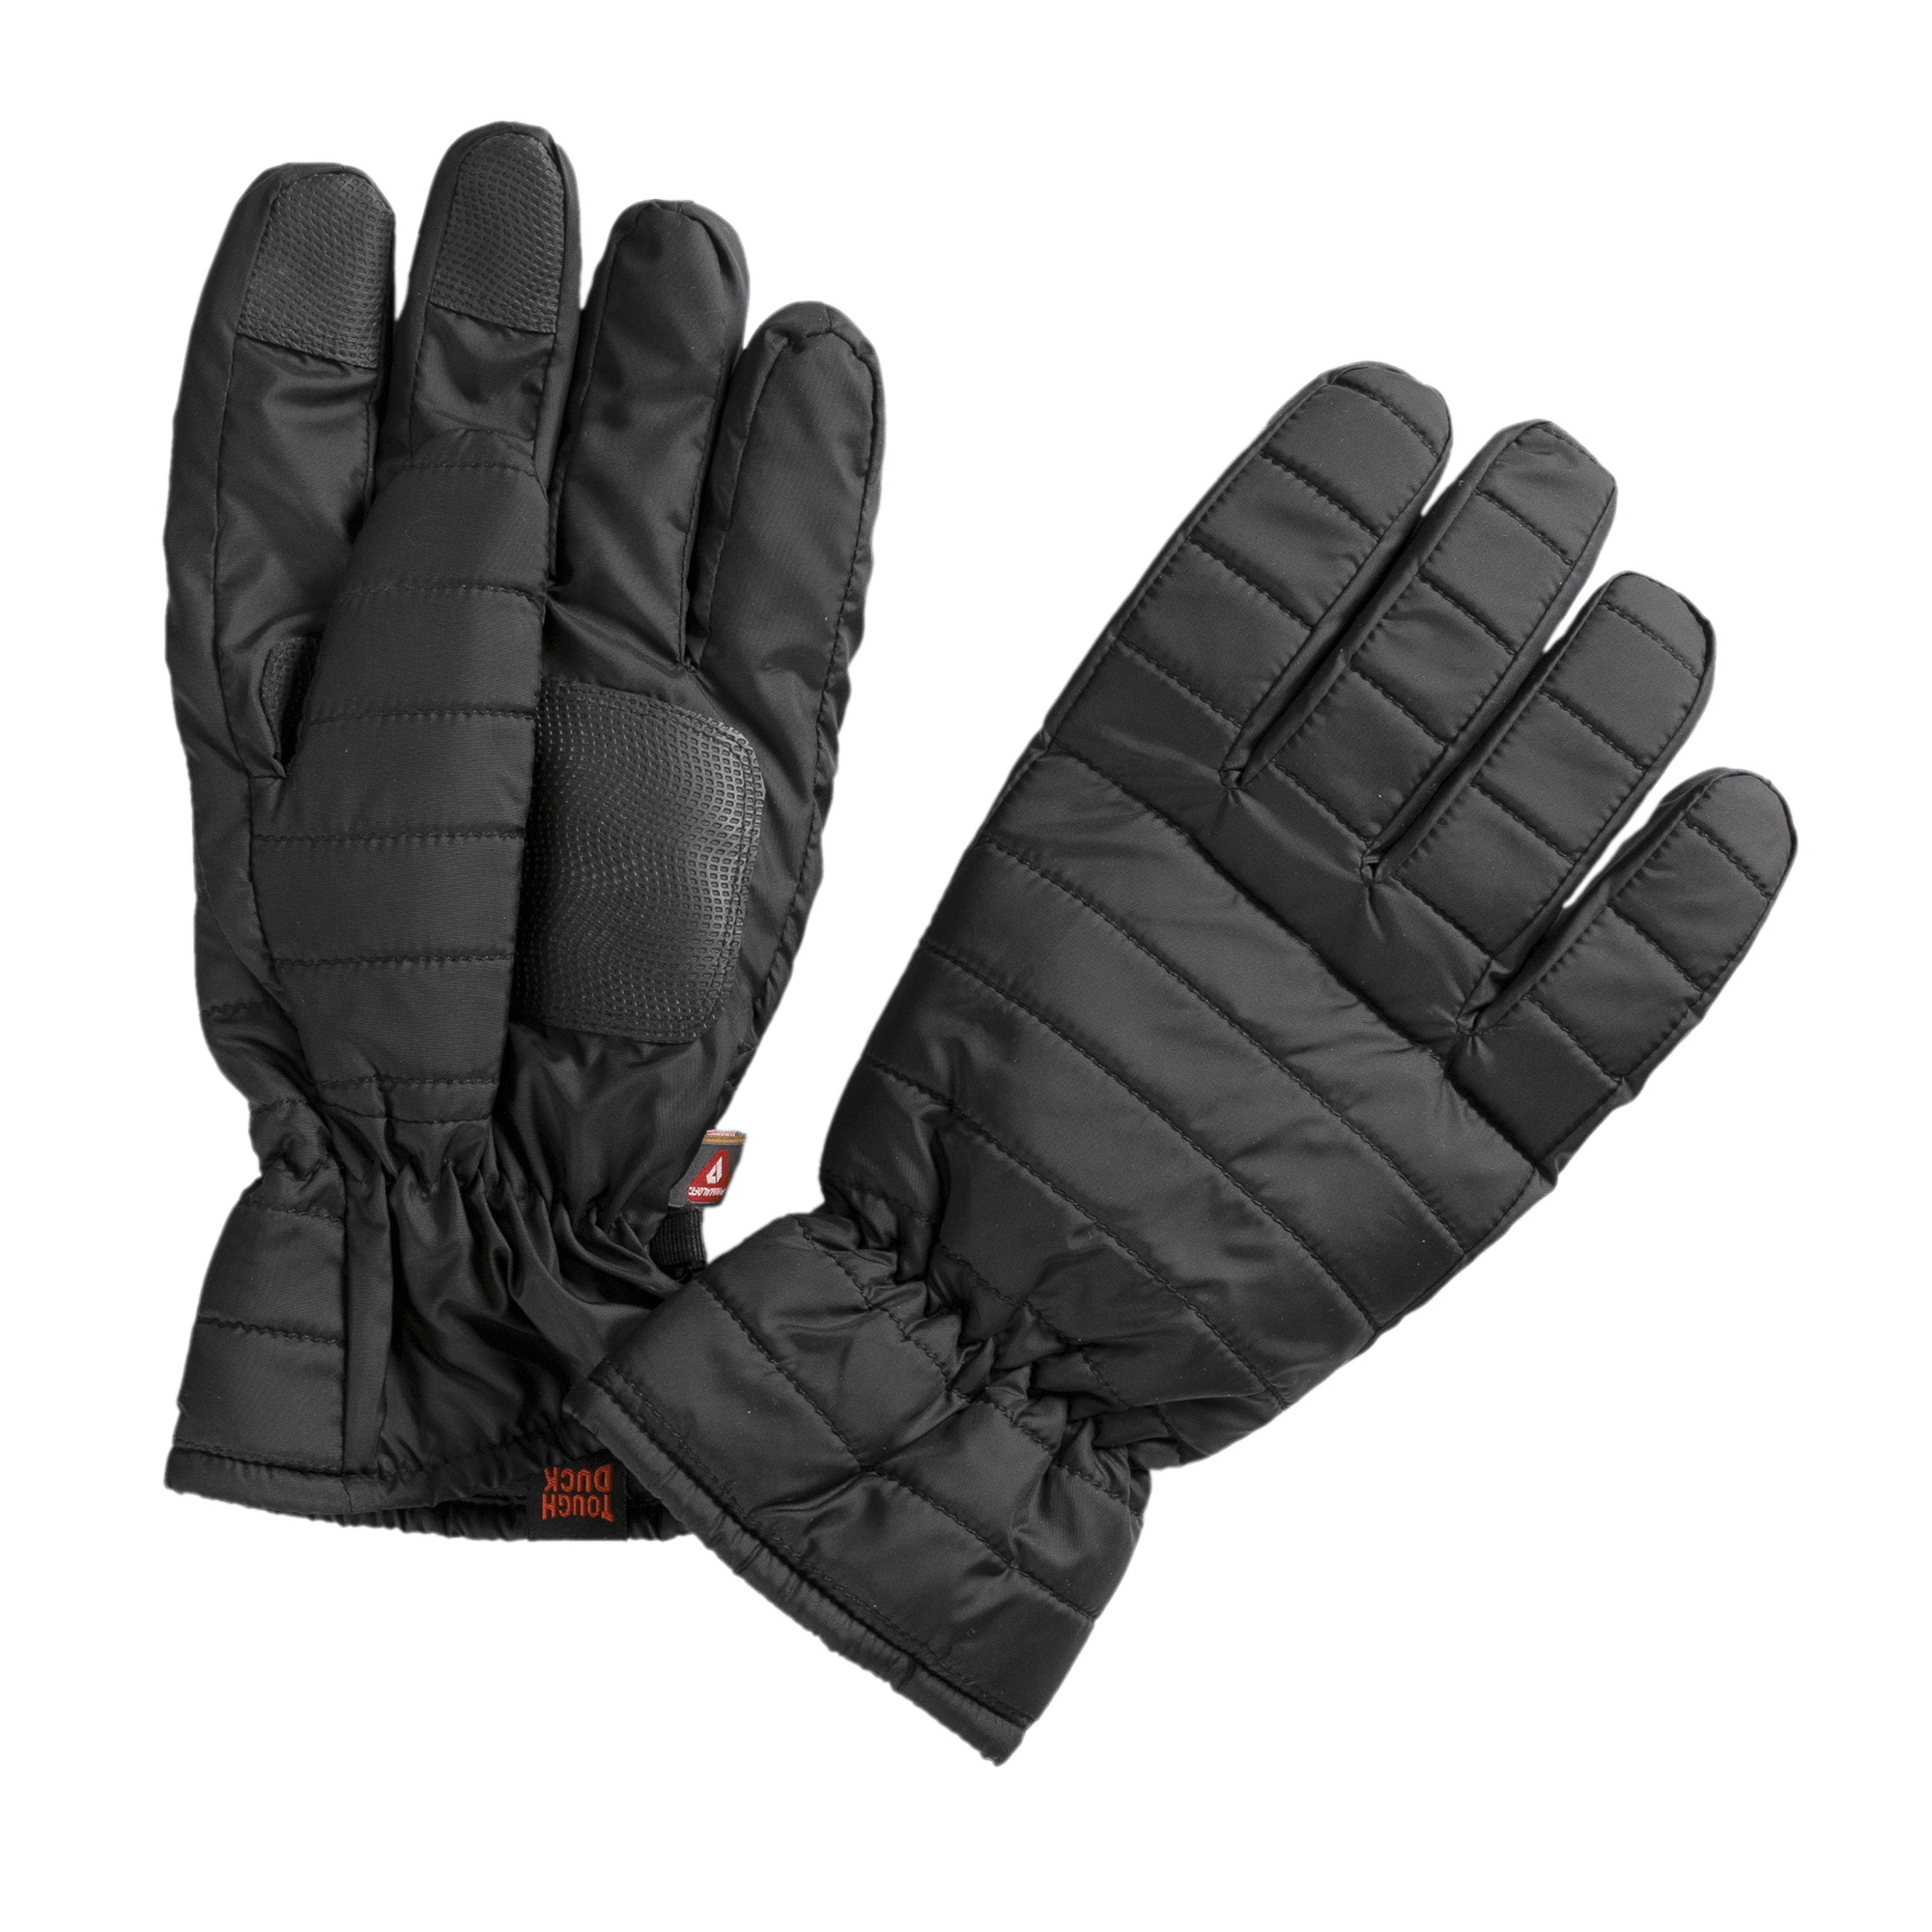 Tough Duck Men's Winter Leather Pile Lined Mittens